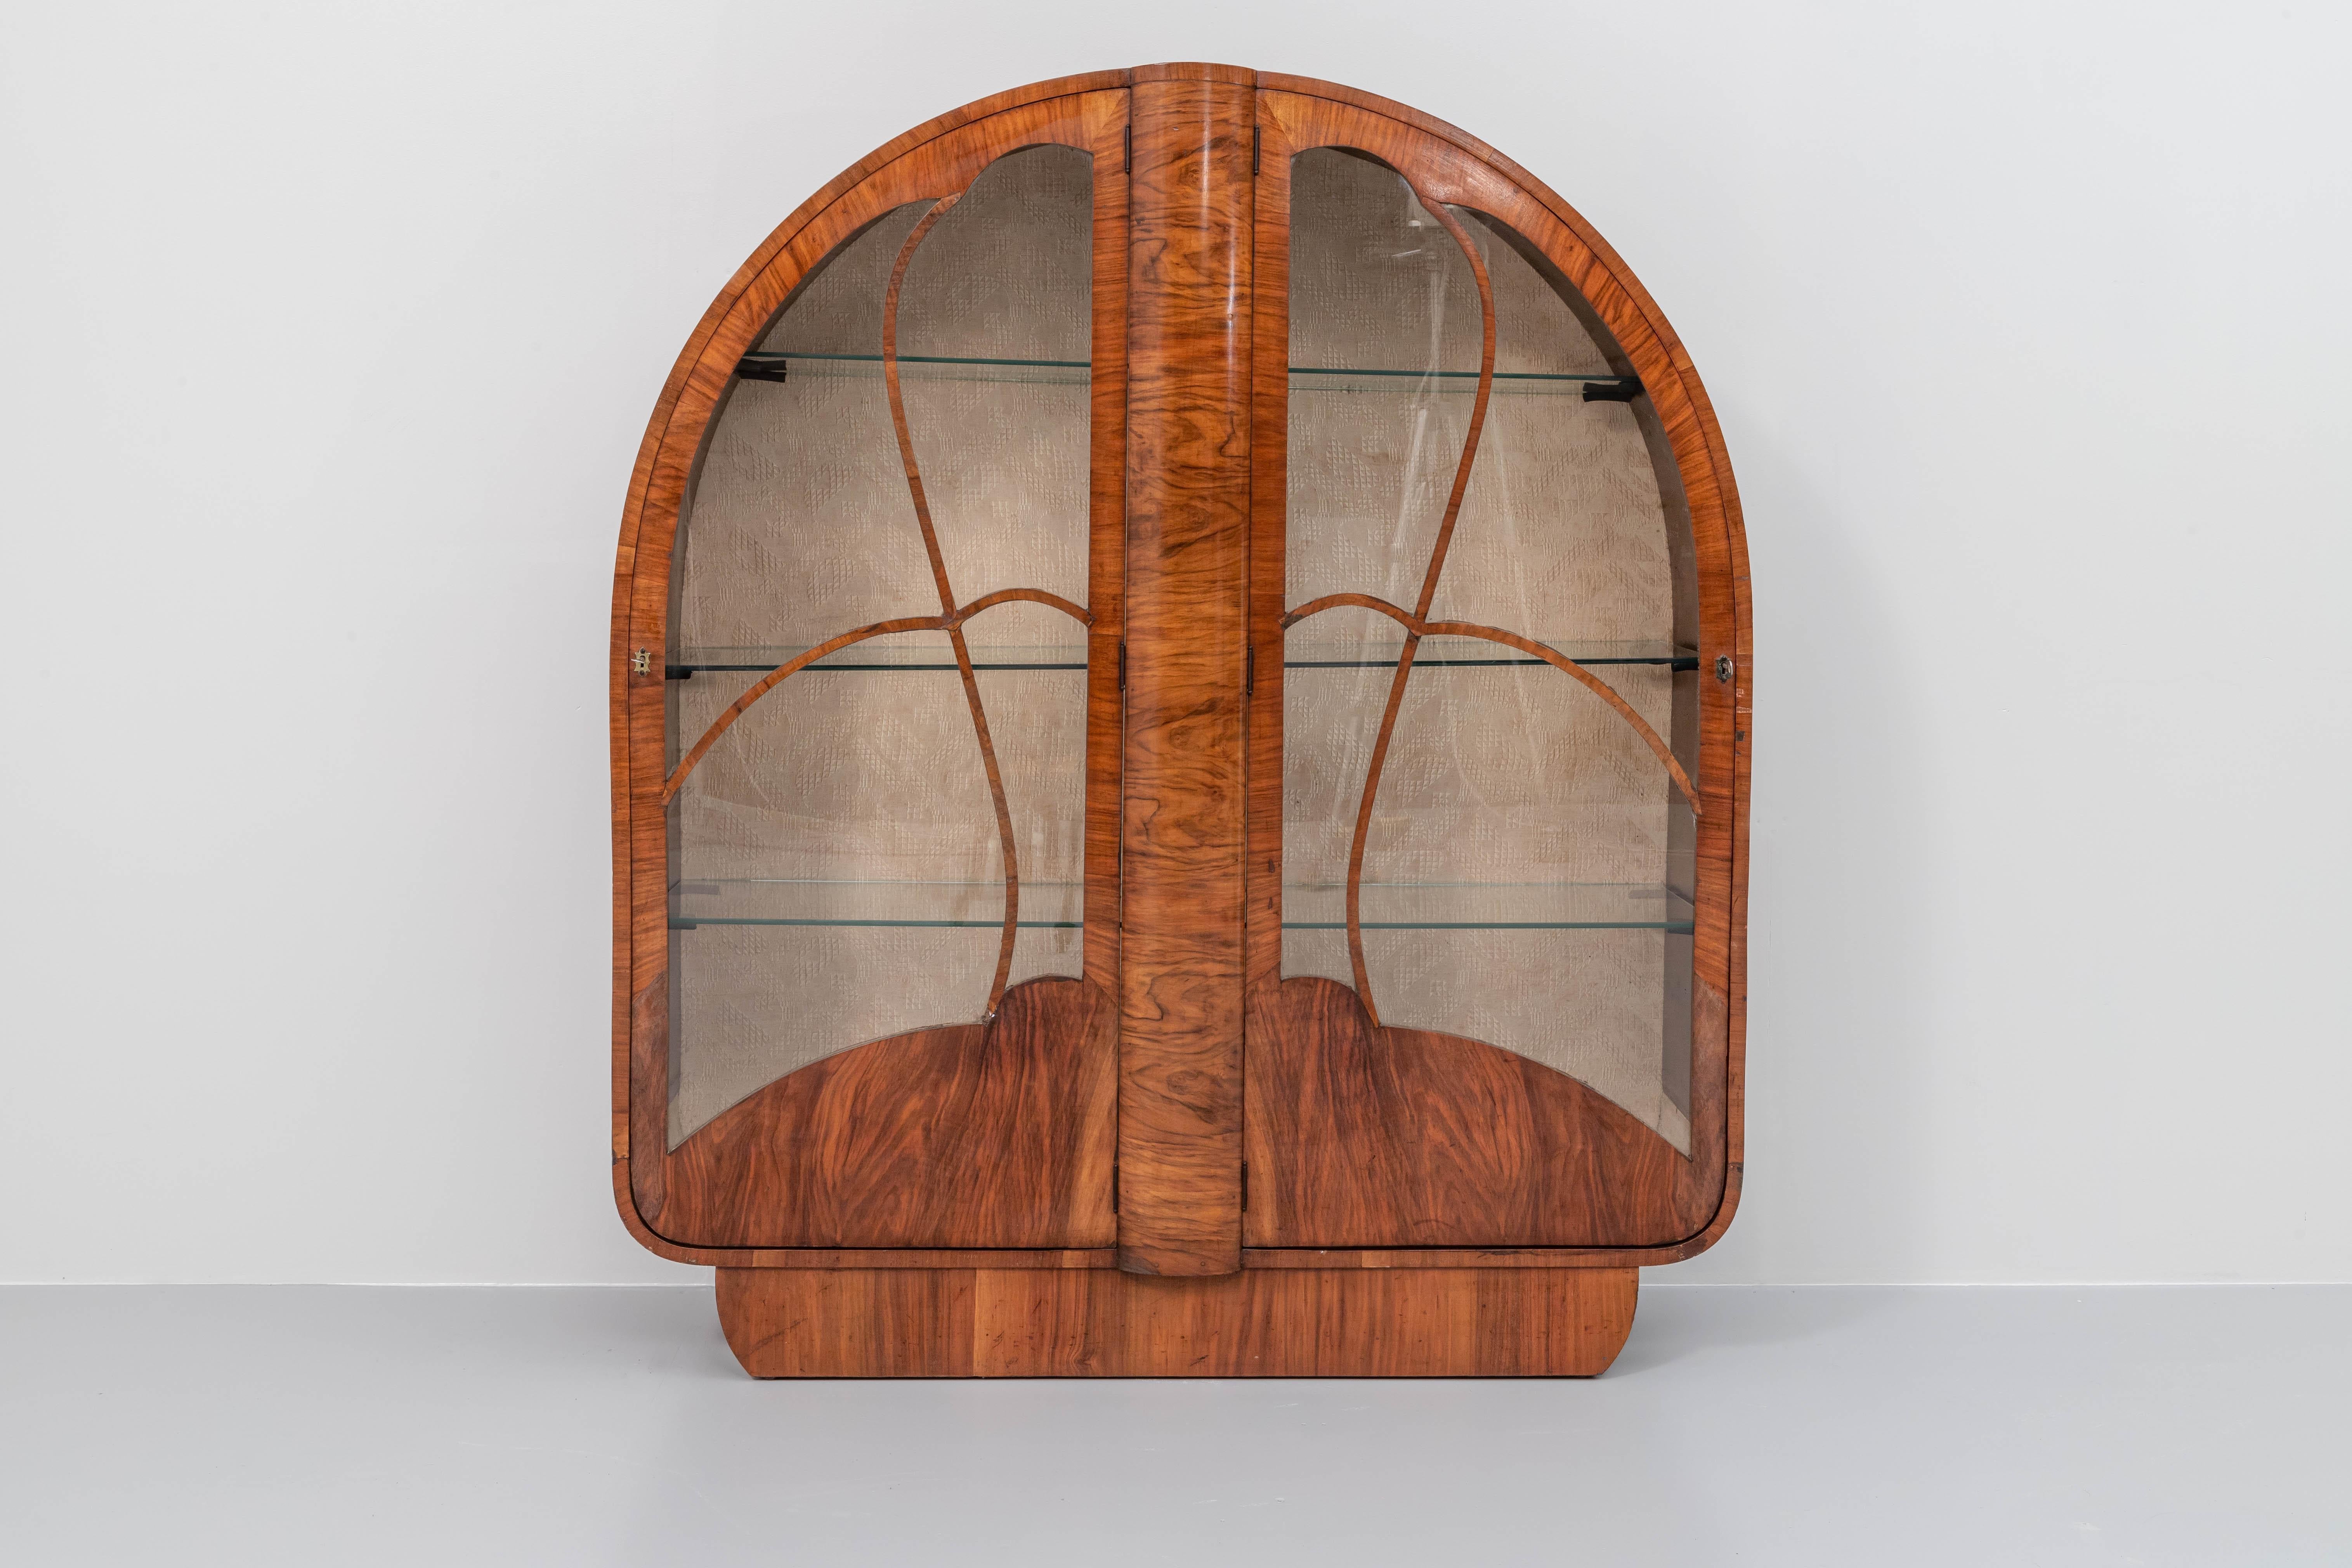 Graceful and elegant french Art Deco cabinet more than a century old. The shapes and the colour of the wood really stand out in this phenomenal piece of craftsmanship. A lot of time and effort must have gone into this project if you look at how